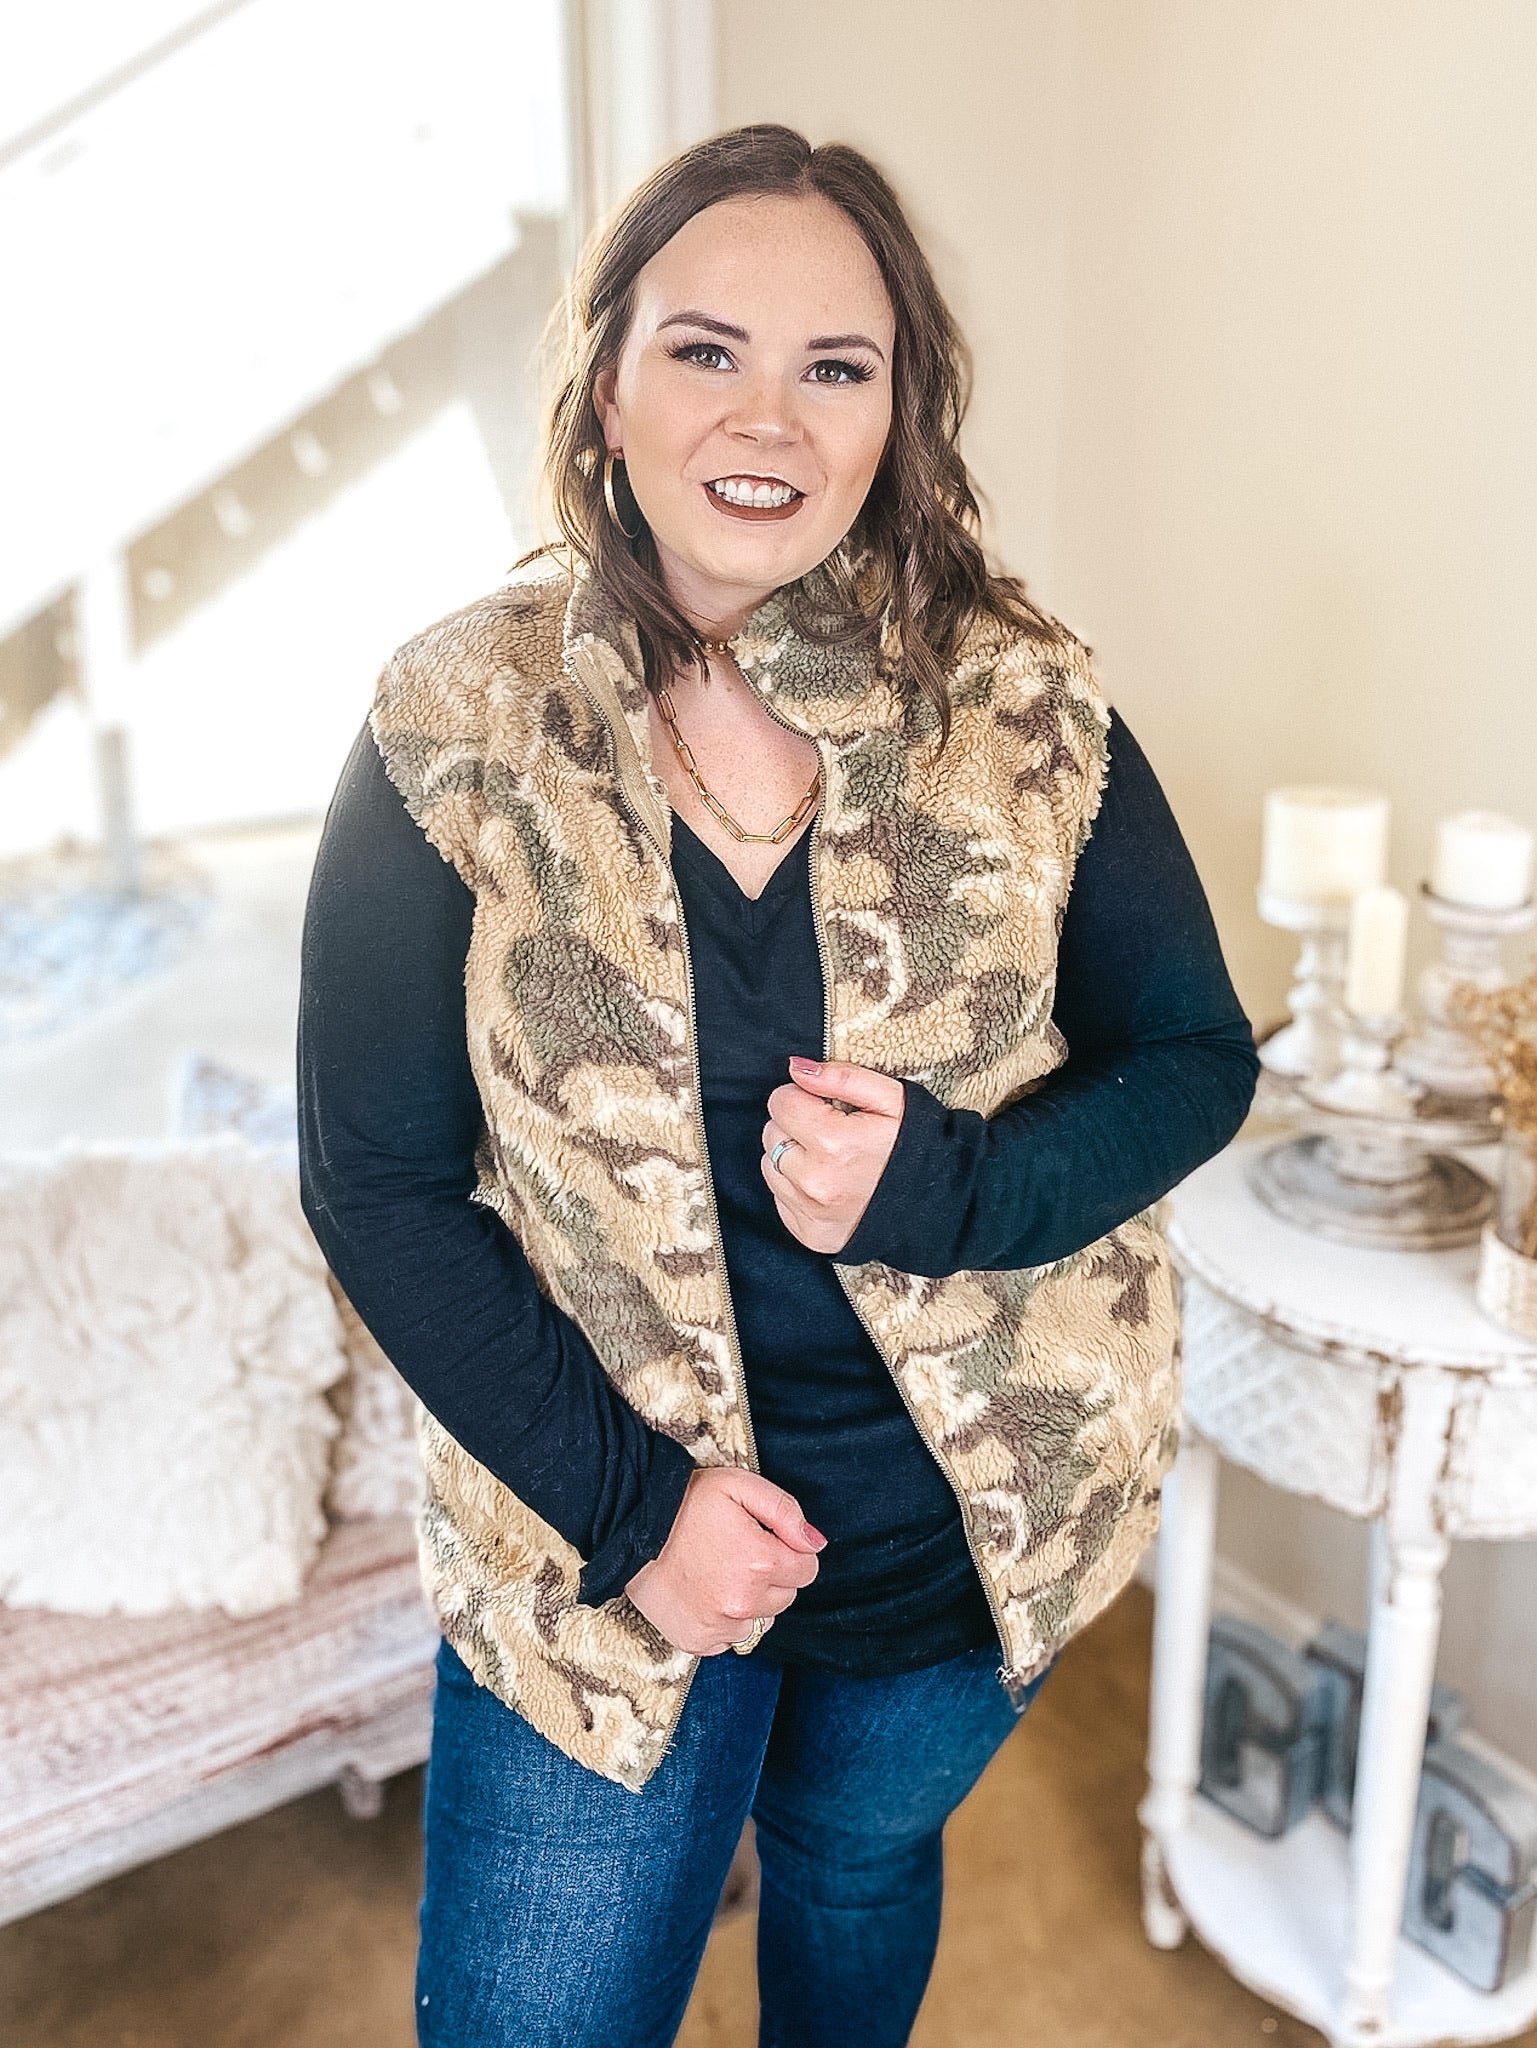 Last Chance Size Small & Large | It's Not Complicated Zip Up Teddy Vest with Pockets in Camouflage - Giddy Up Glamour Boutique